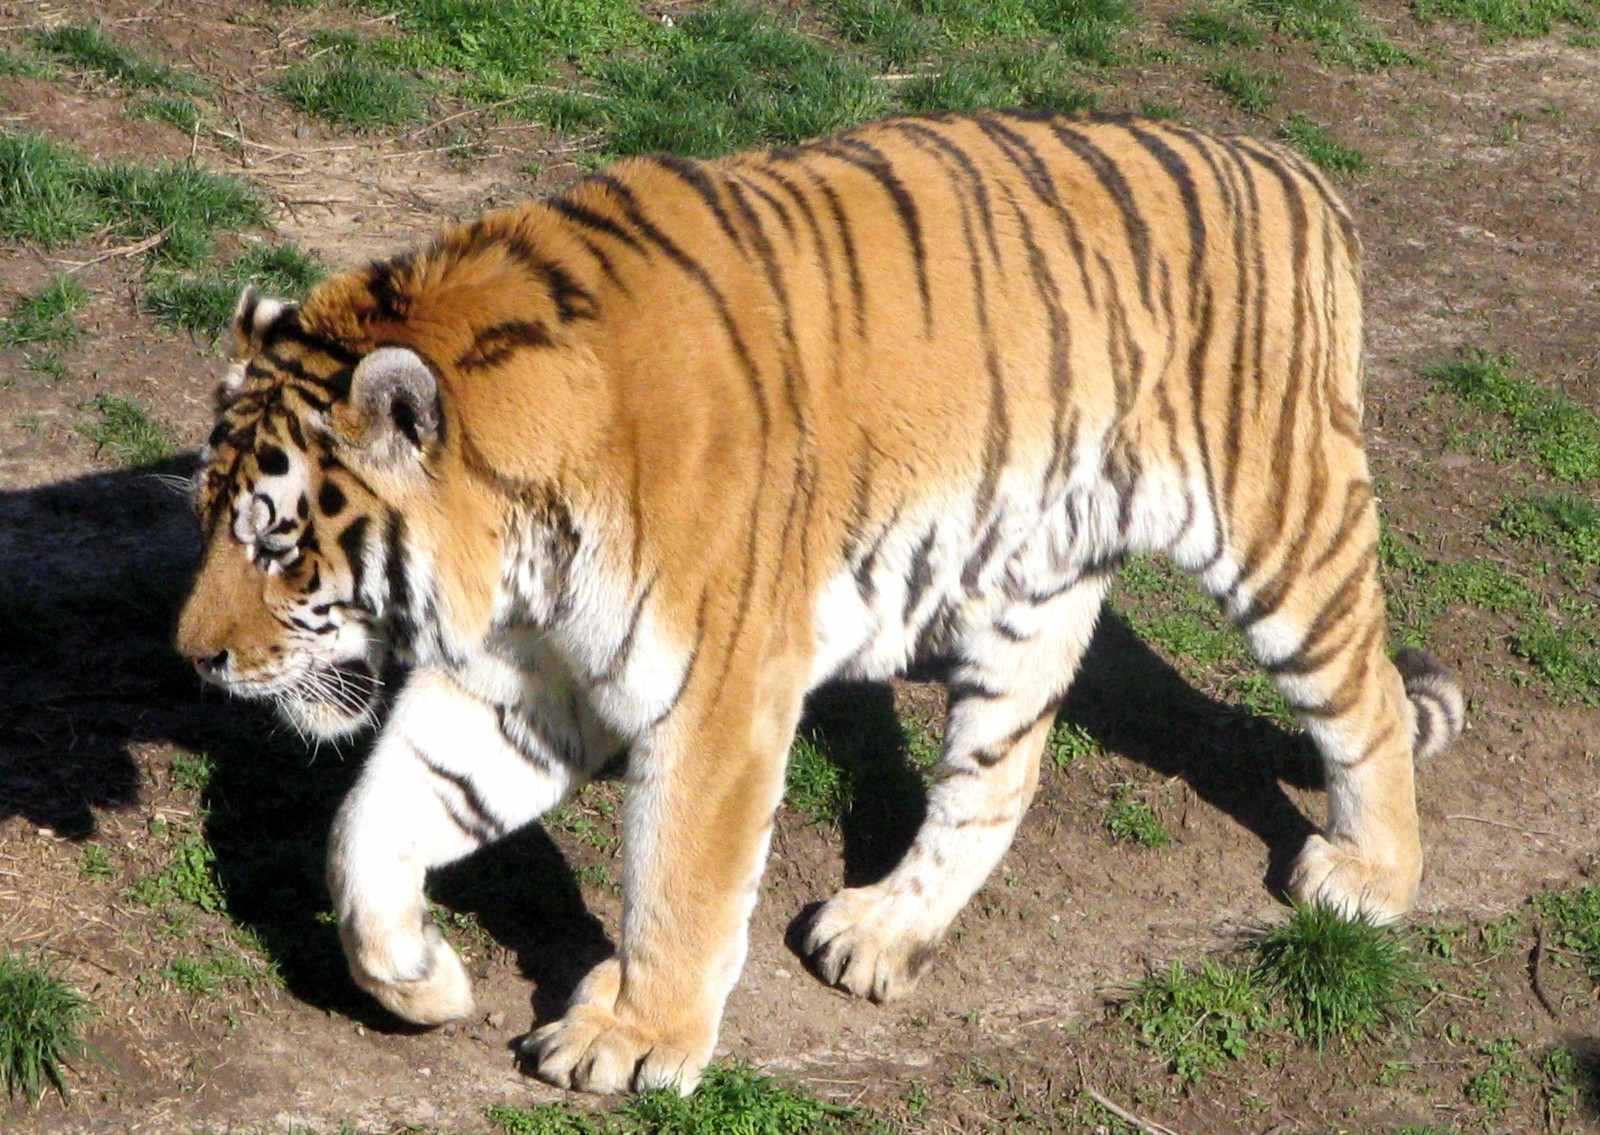 http://dangerousintersection.org/wp-content/uploads/2008/01/tiger-lo%20res.jpg